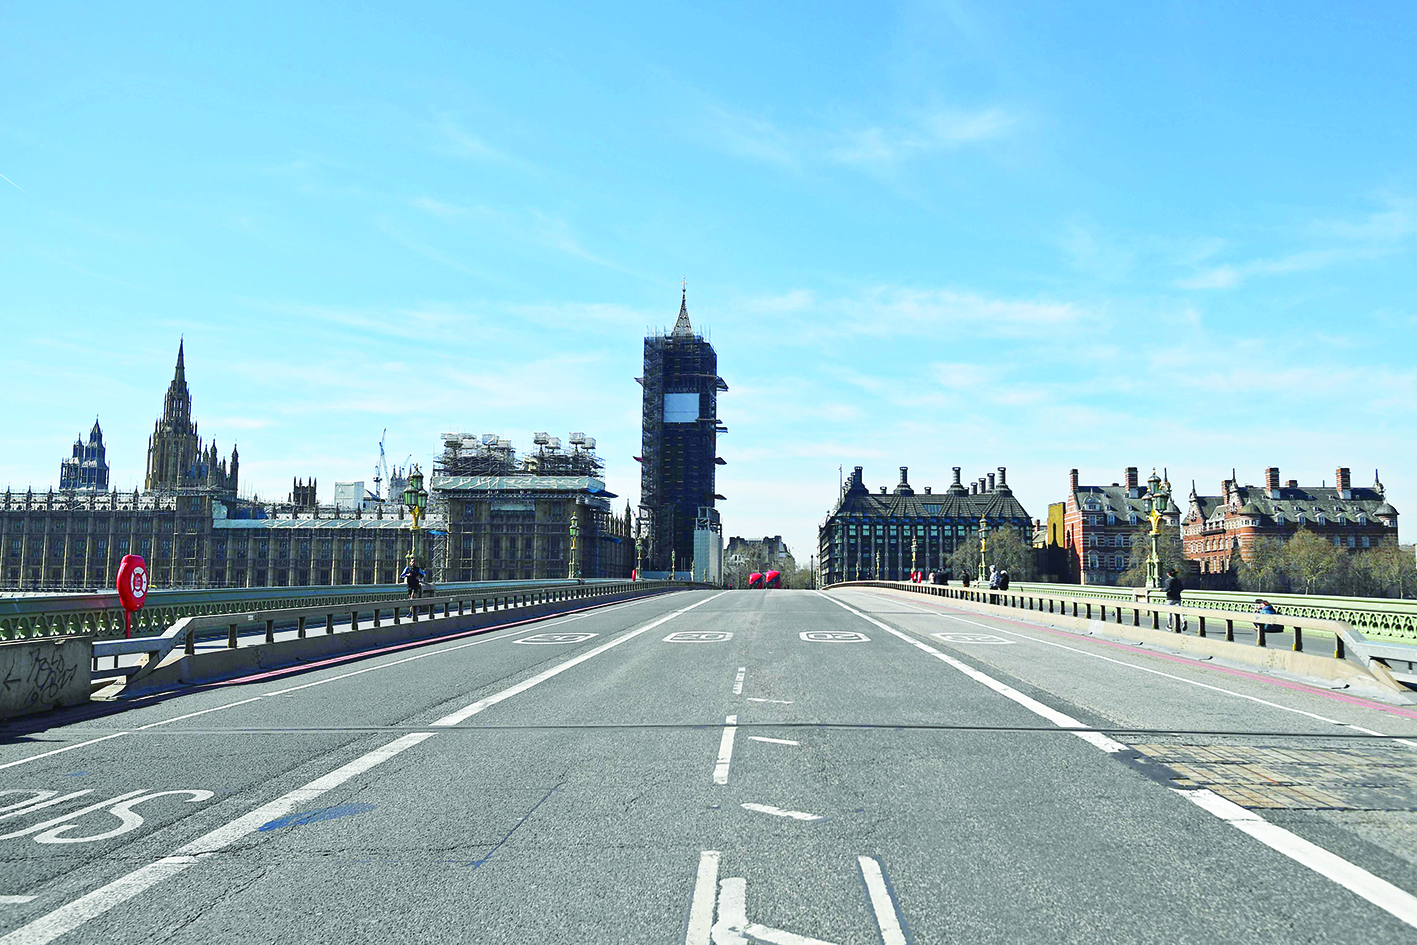 TOPSHOT - A deserted Westminster Bridge is pictured looking north around Monday lunch time, in central London, March 23, 2020, as governments scramble to defend their own economies against the coronavirus COVID-19 pandemic in order to ward off a long-term global recession and future waves of infections. (Photo by Ben STANSALL / AFP)